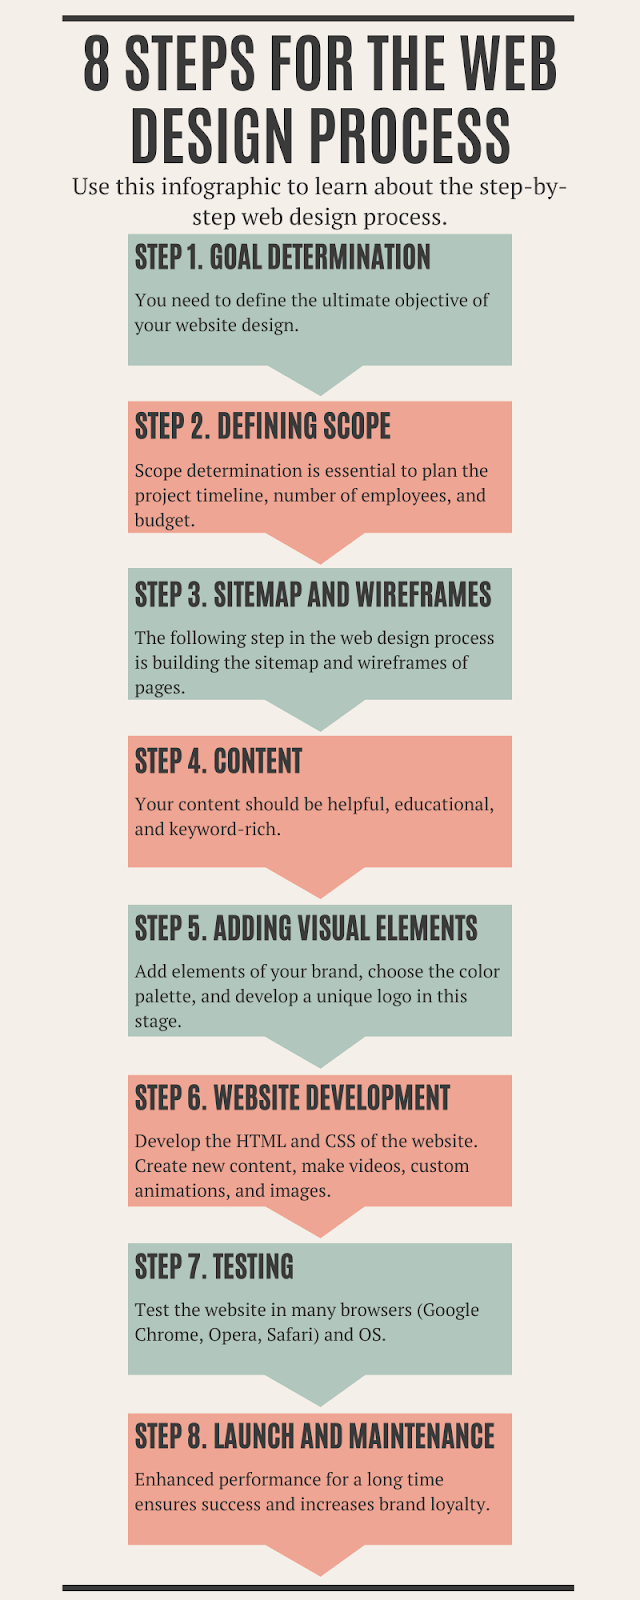 8 Easy Steps to Web Design Process and Planning